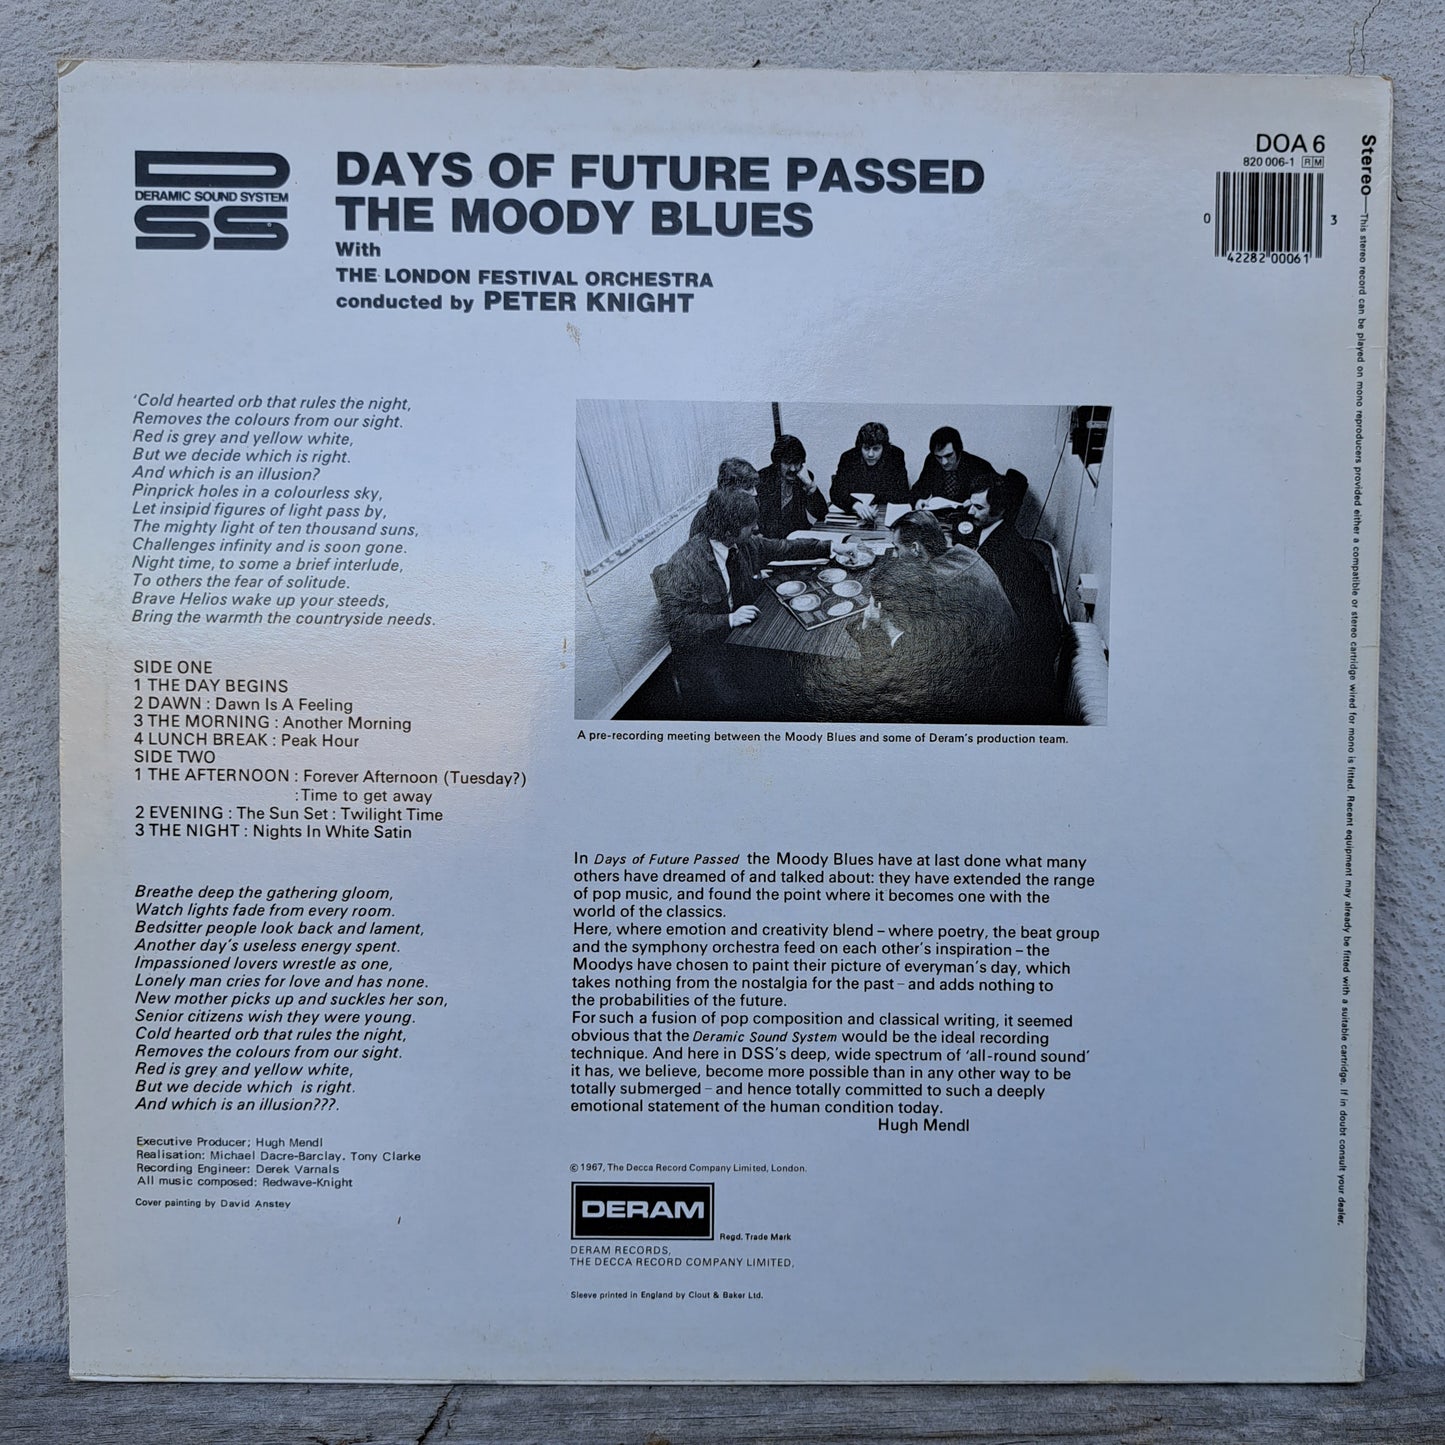 The Moody Blues - Days of future passed